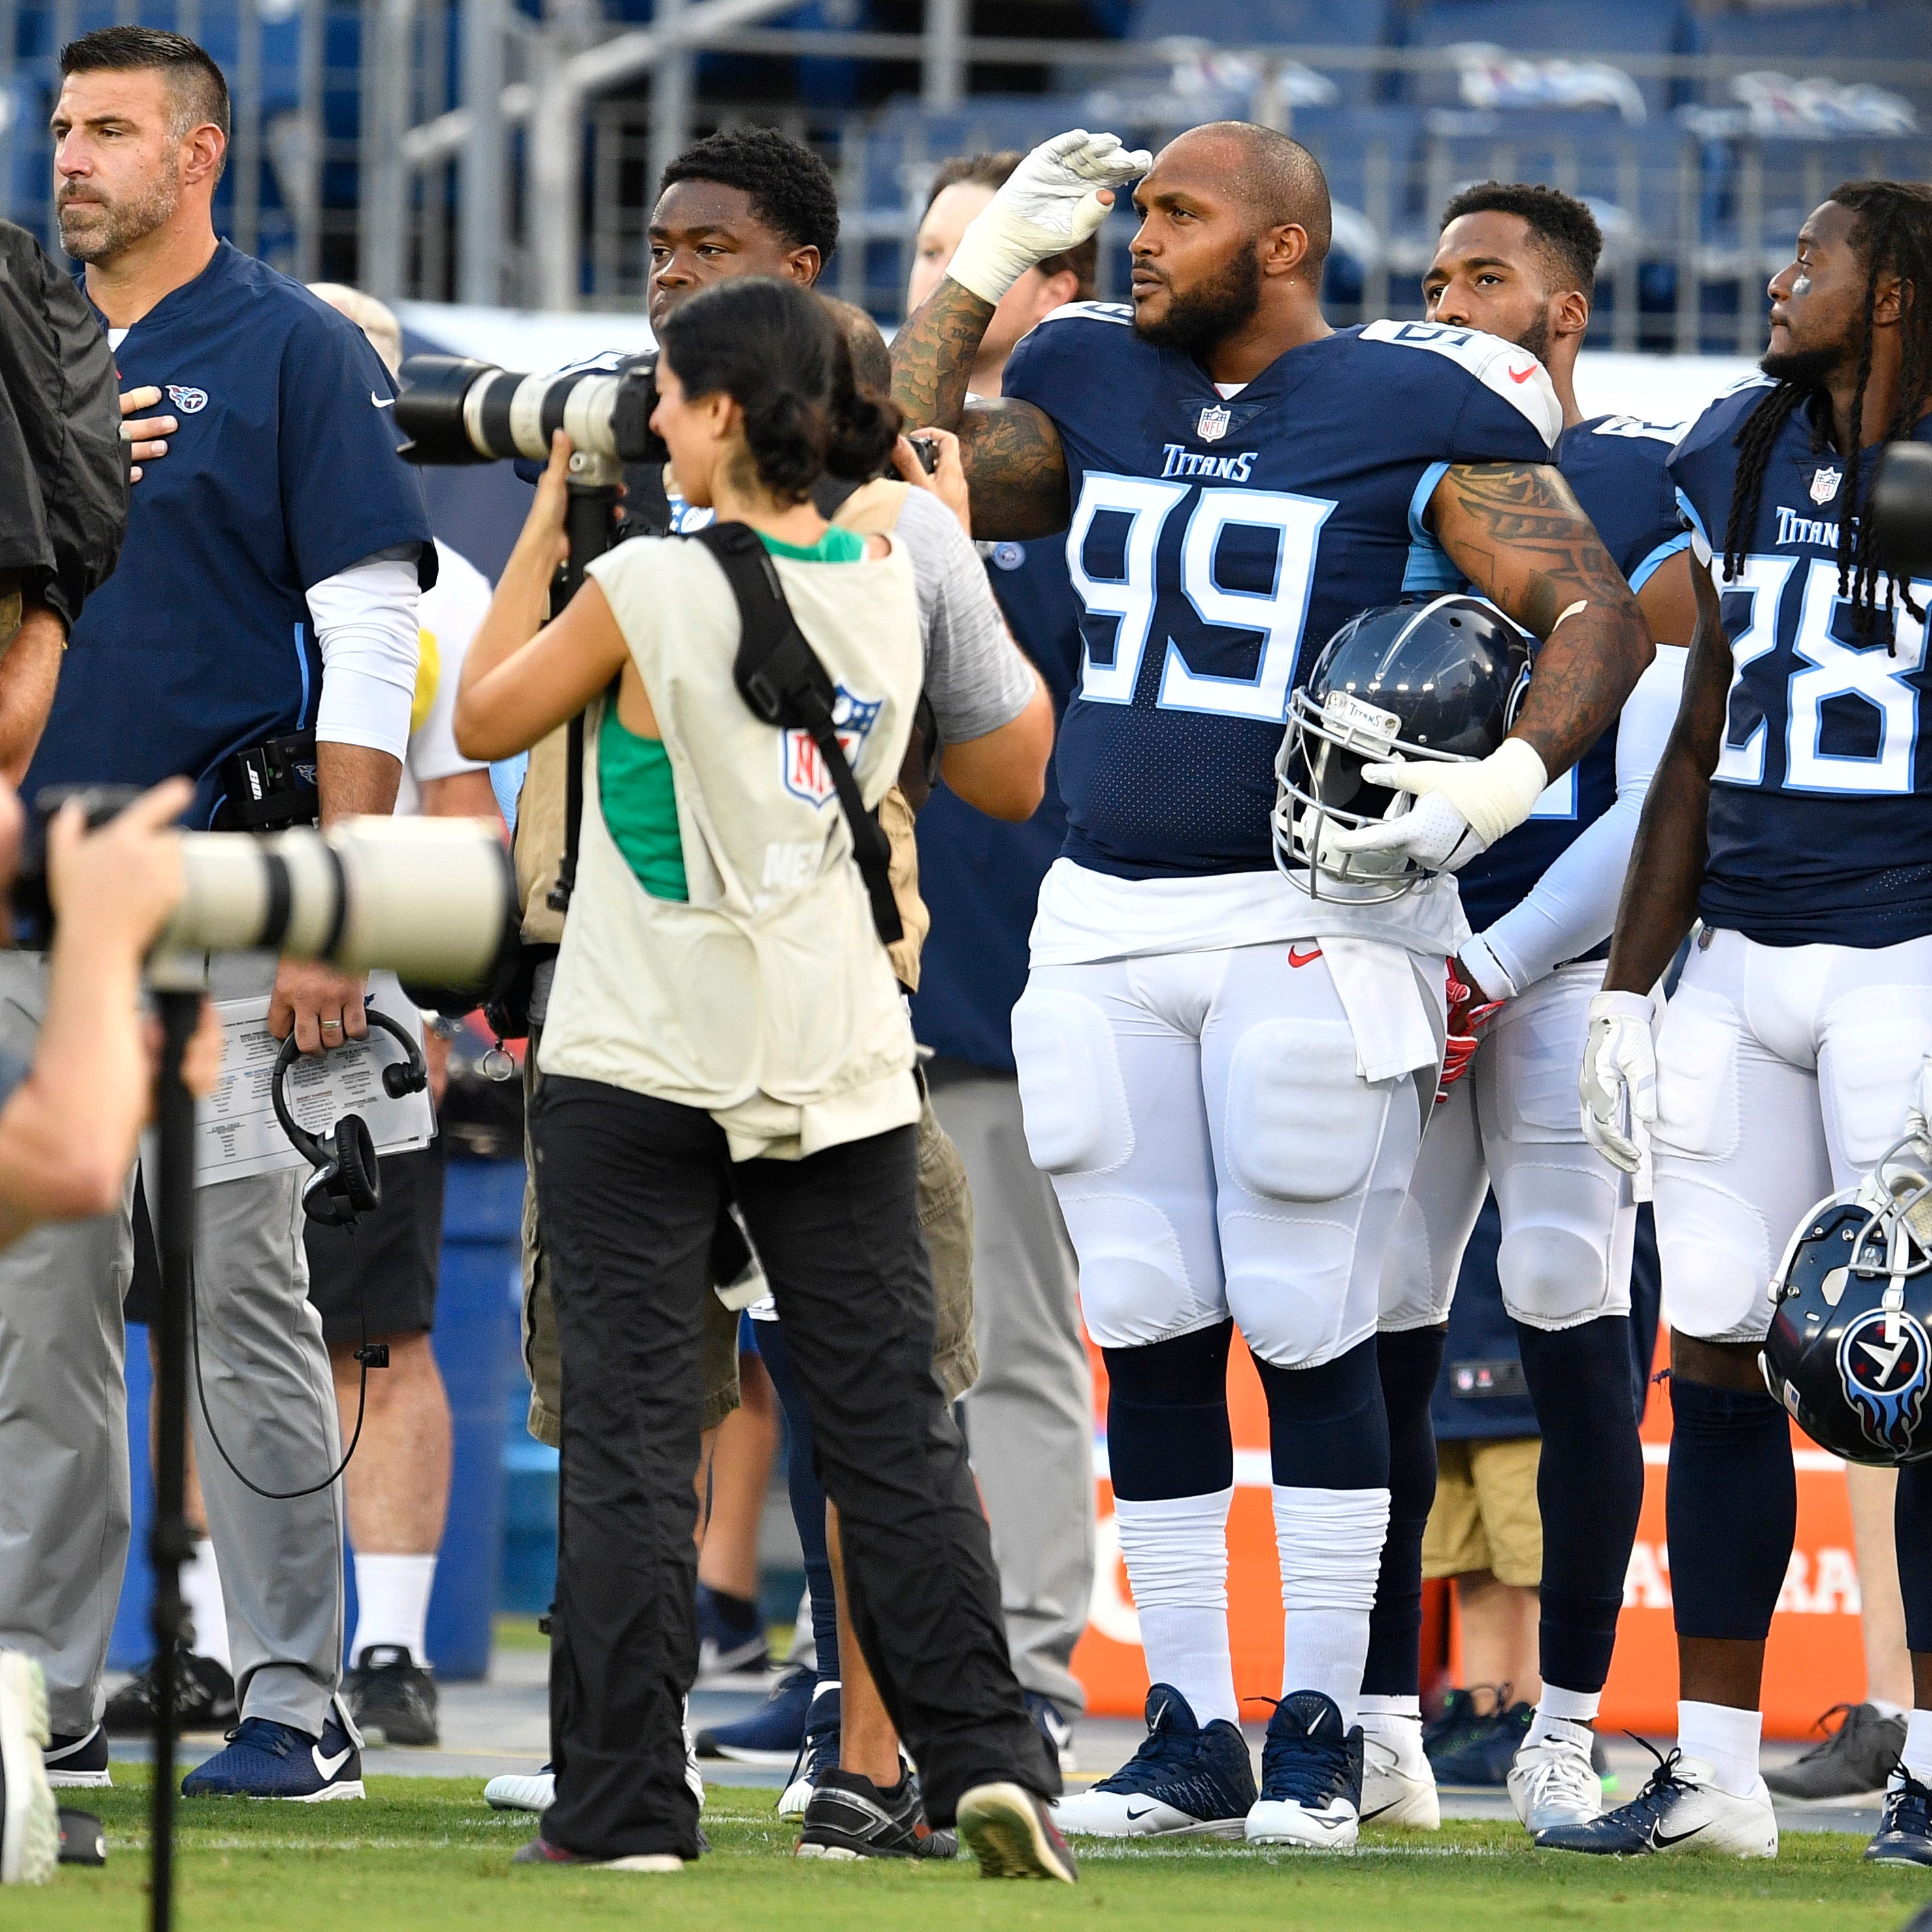 Titans defensive tackle Jurrell Casey (99) salutes during the National Anthem before the preseason game against the Tampa Bay Buccaneers at Nissan Stadium Saturday, Aug. 18, 2018, in Nashville, Tenn.